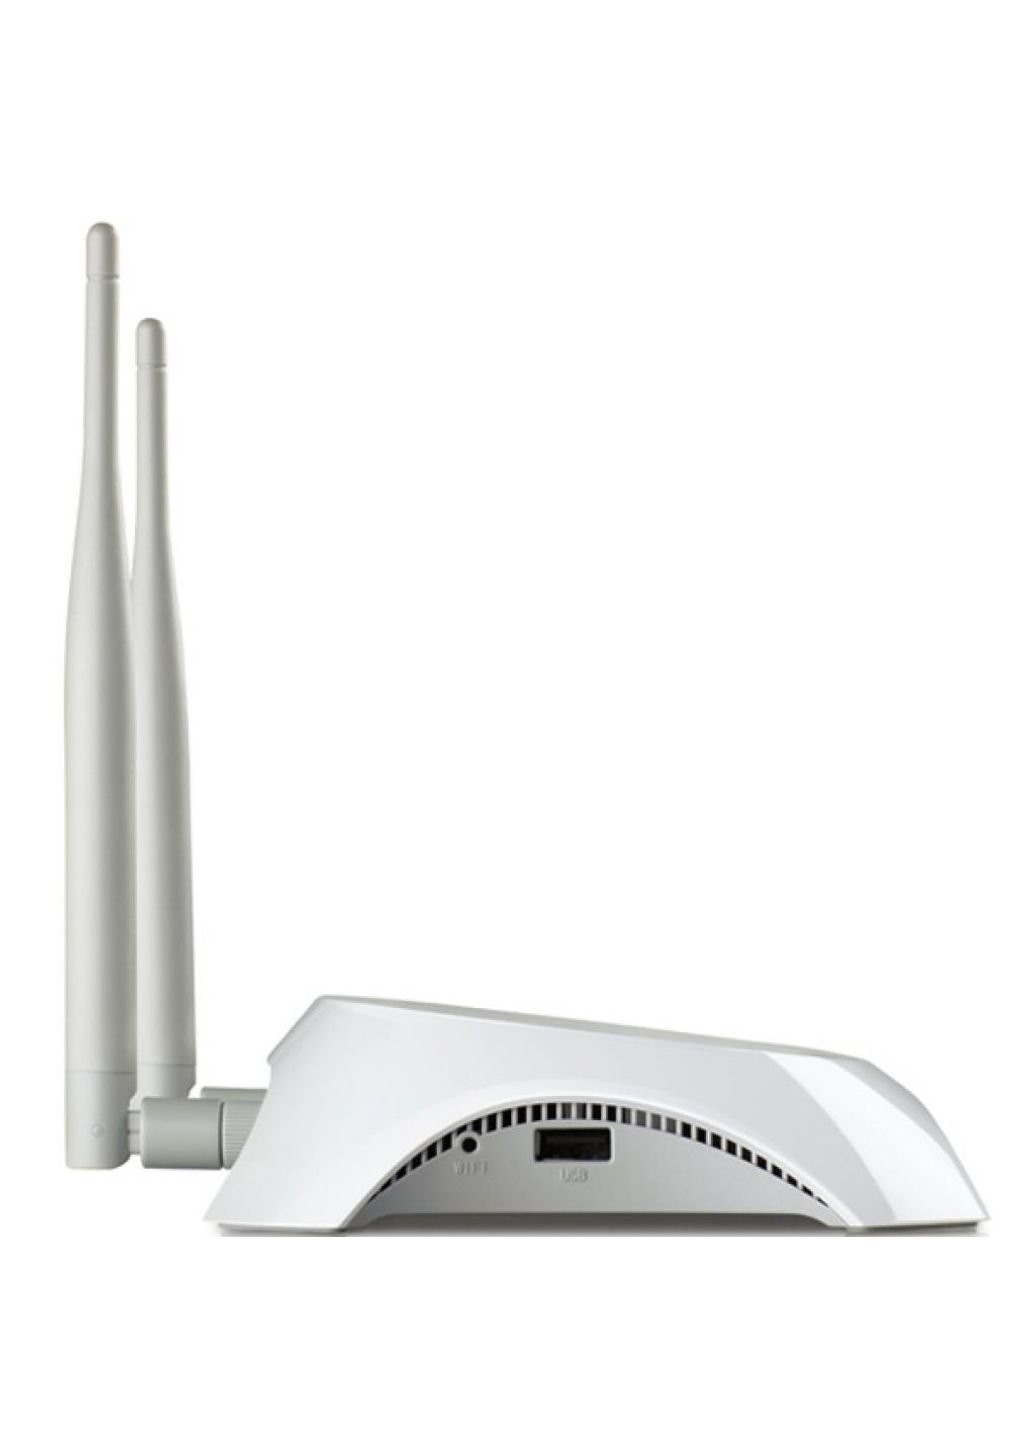 Маршрутизатор TL-MR3420 TP-Link (250095758)